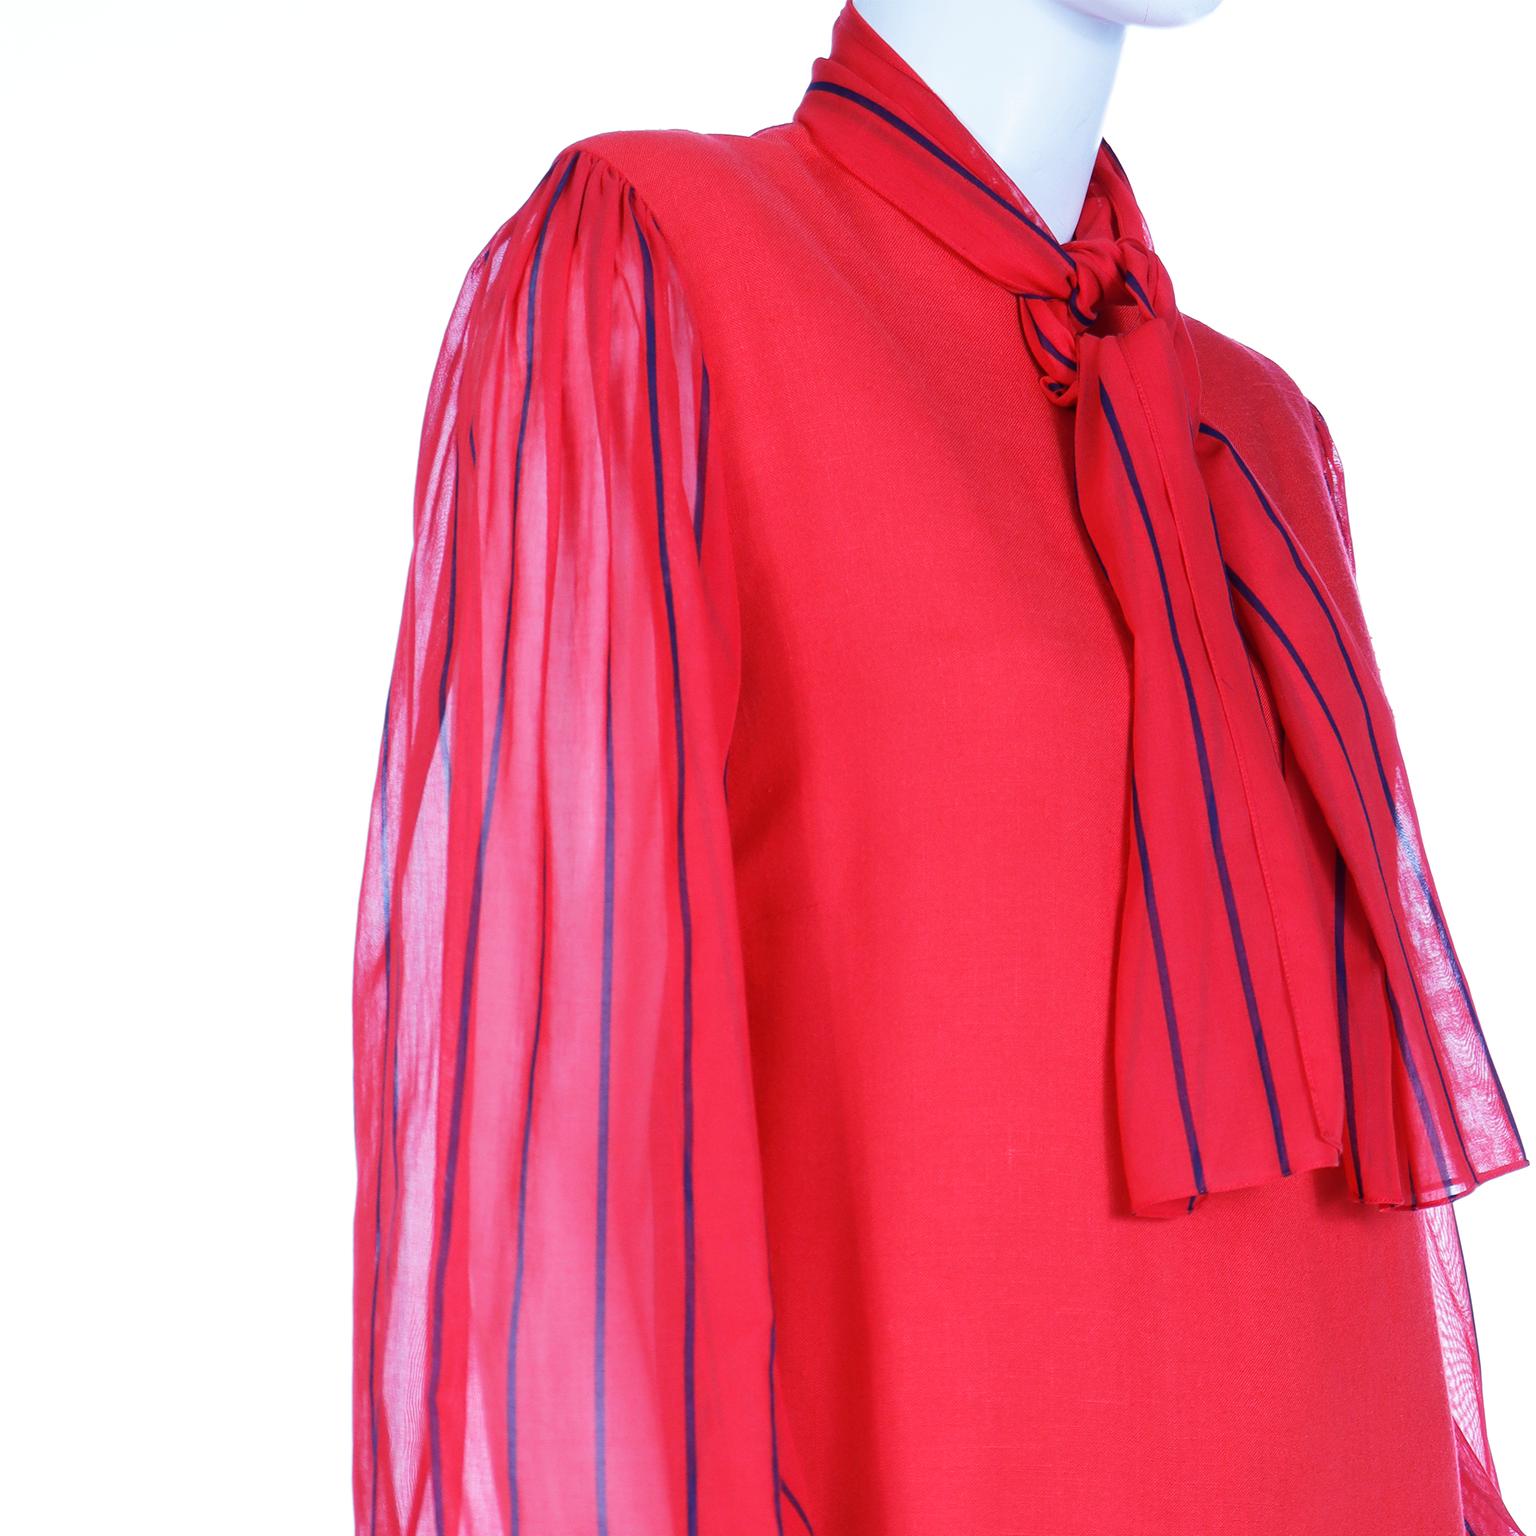 Pauline Trigere Vintage Red Dress With Sheer Striped Sleeves & Scarf For Sale 3